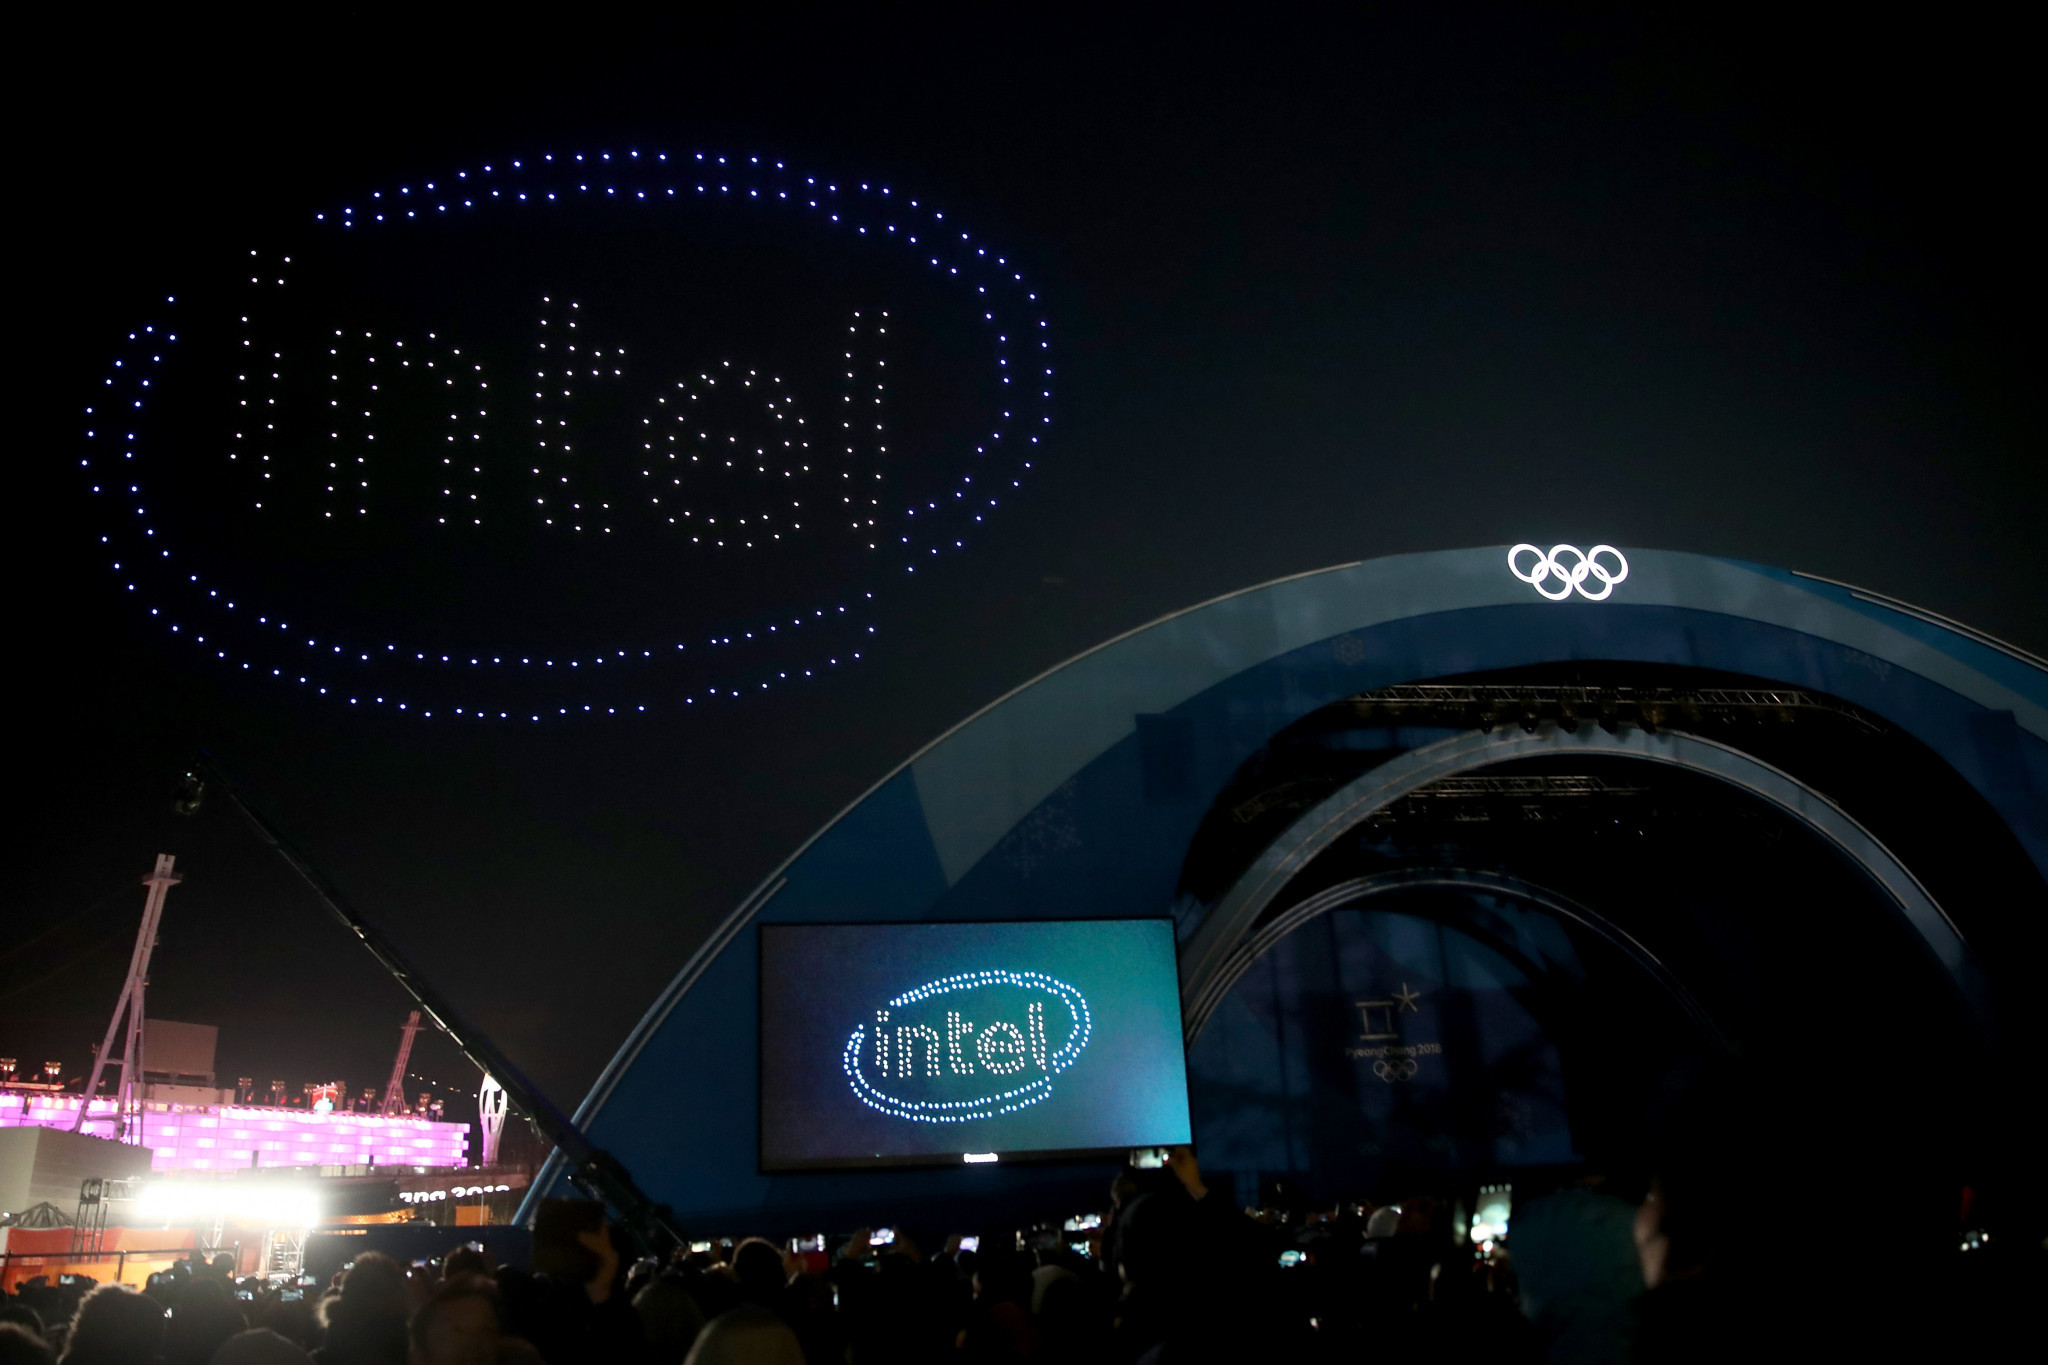 Demand for cloud services and home-working boost financial performance of IOC TOP sponsor Intel